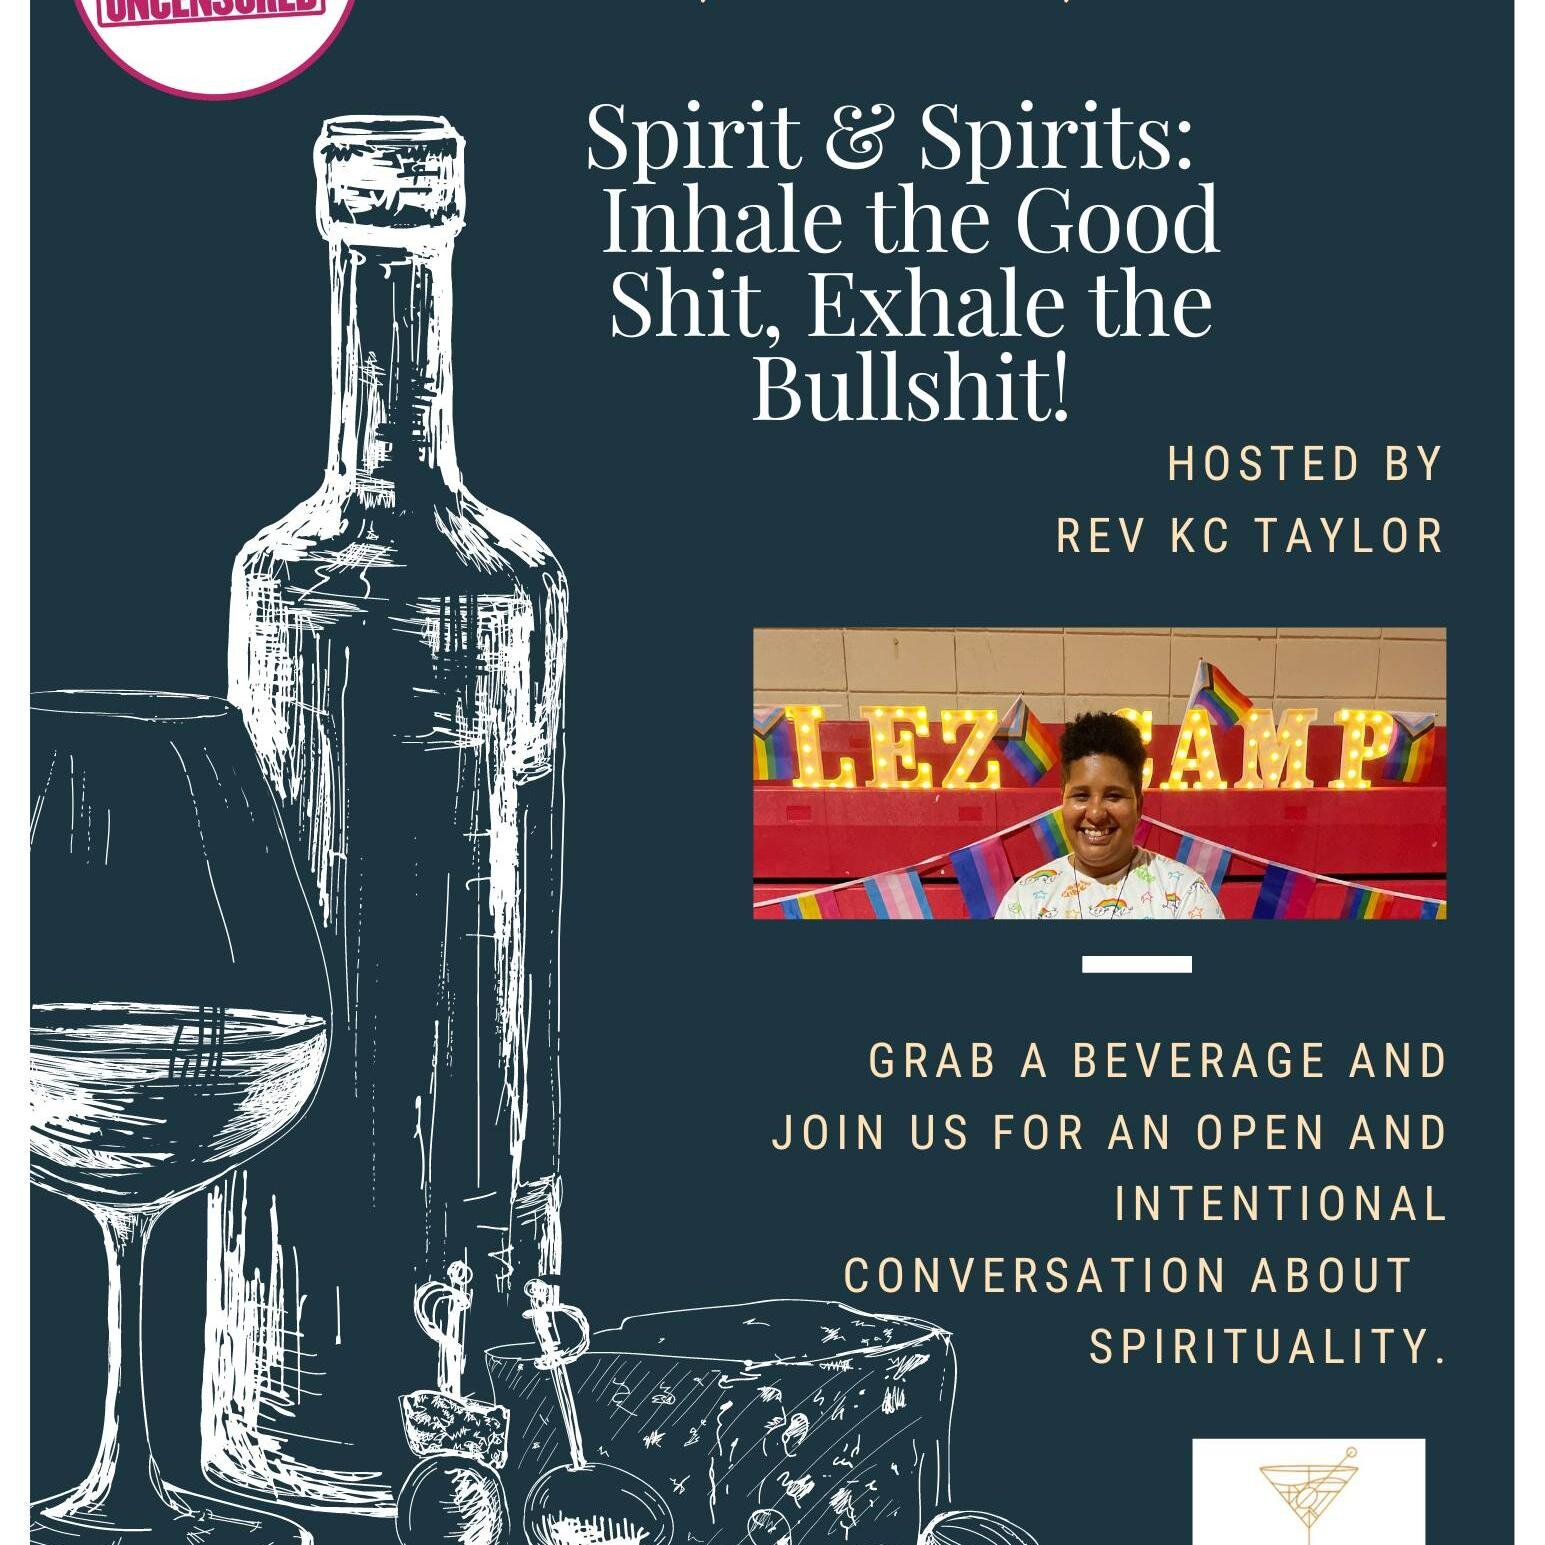 Grab a beverage and join us for an open and intentional conversation about spirituality. Everyone over 21 is welcome. LIVE at Alibi&rsquo;s, 1200 N. Pennsylvania, Oklahoma City, OK 73107. This live event is held in the same location on the last Sunda